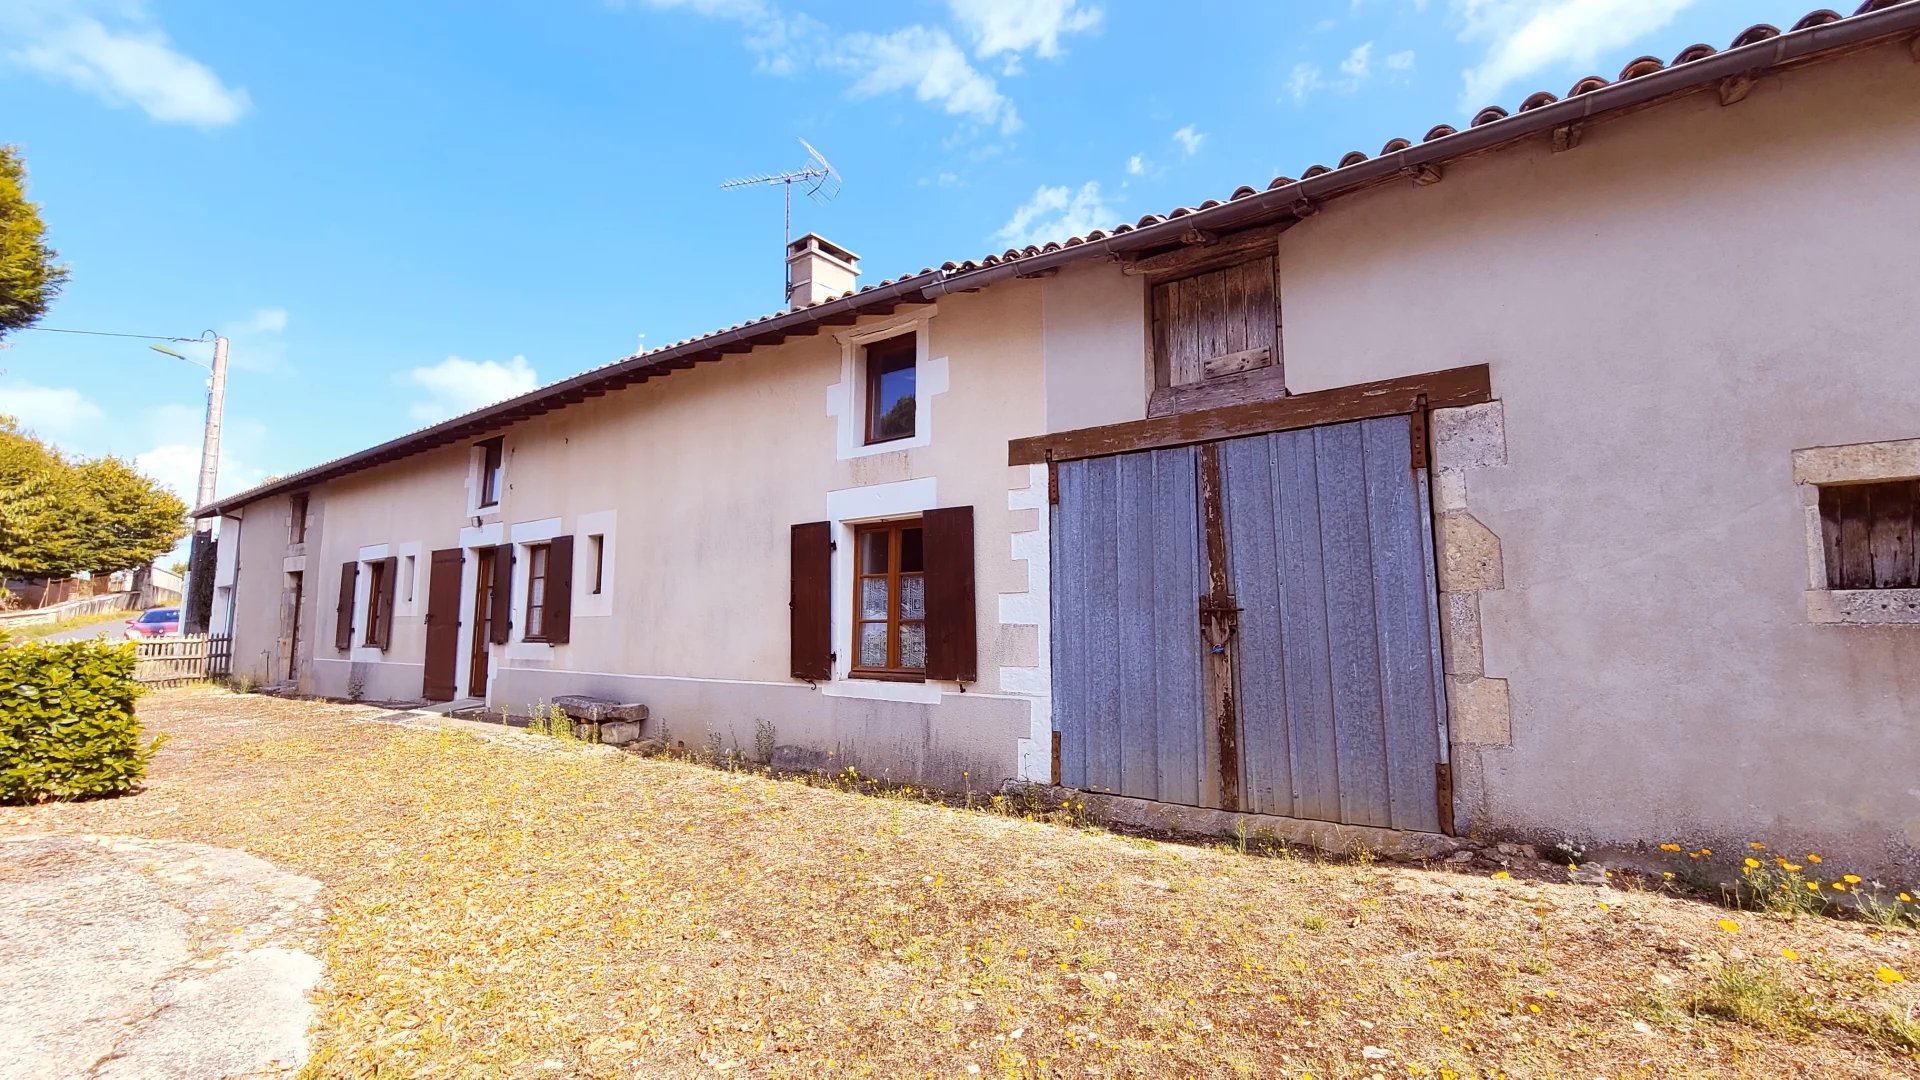 Charming 3-room longère with garden and outbuildings.